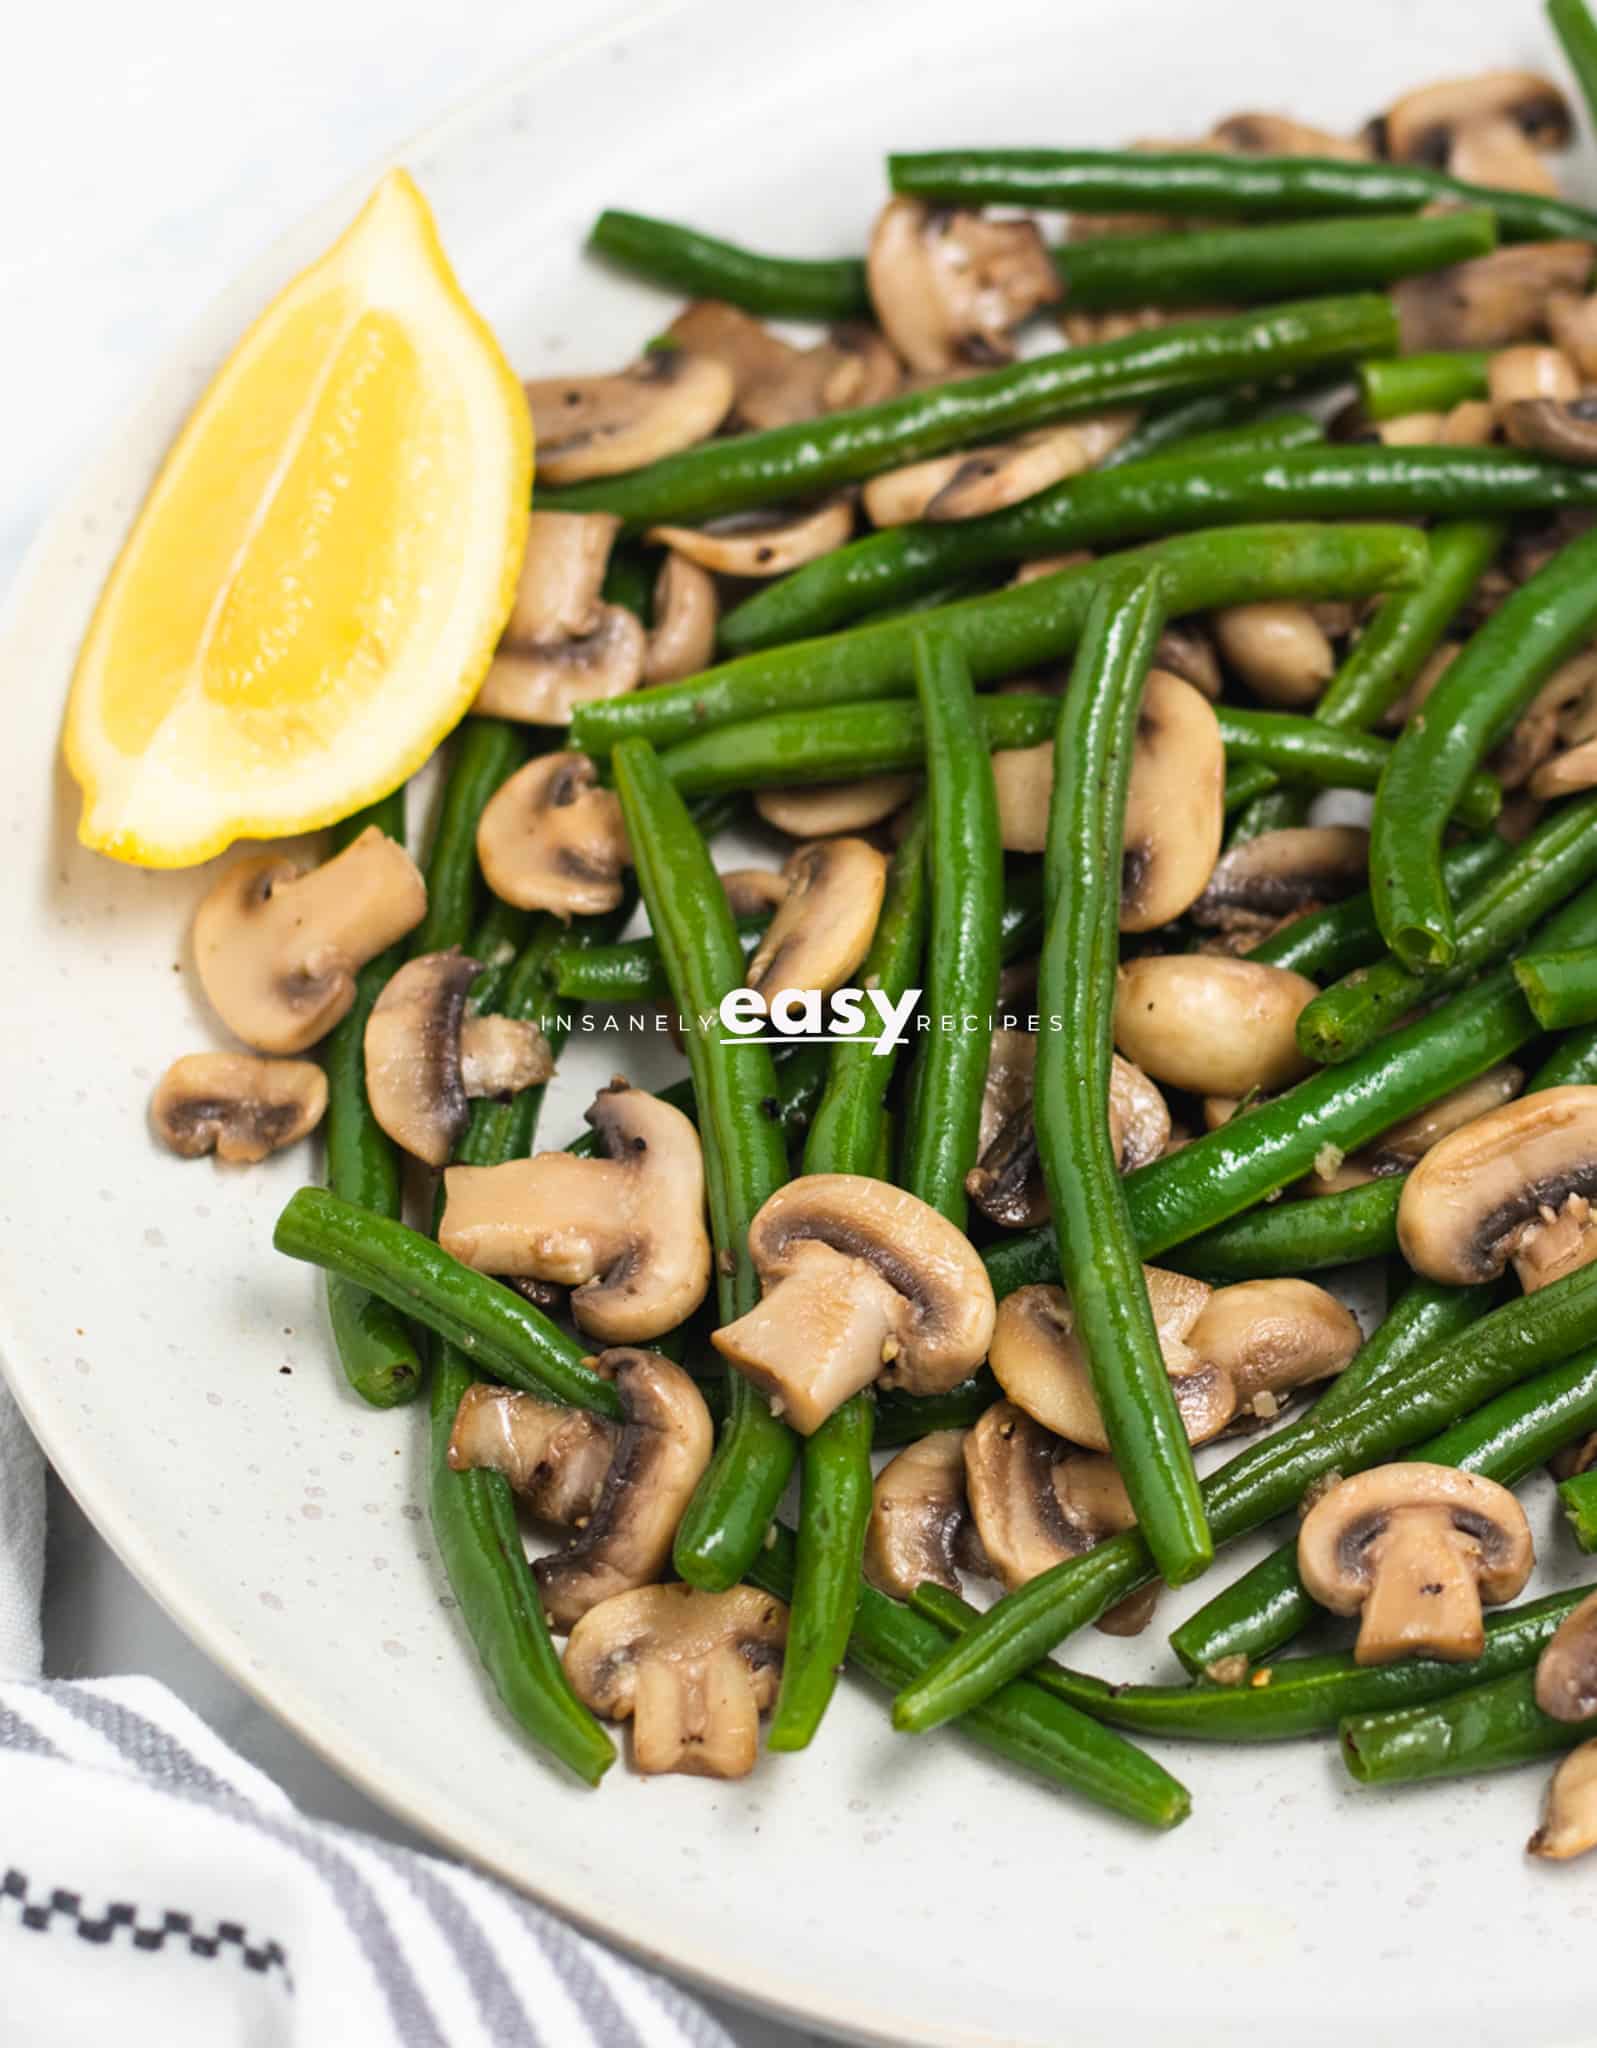 a round white plate filled with green beans and mushrooms. Three lemon wedges are around the edge of the plate.